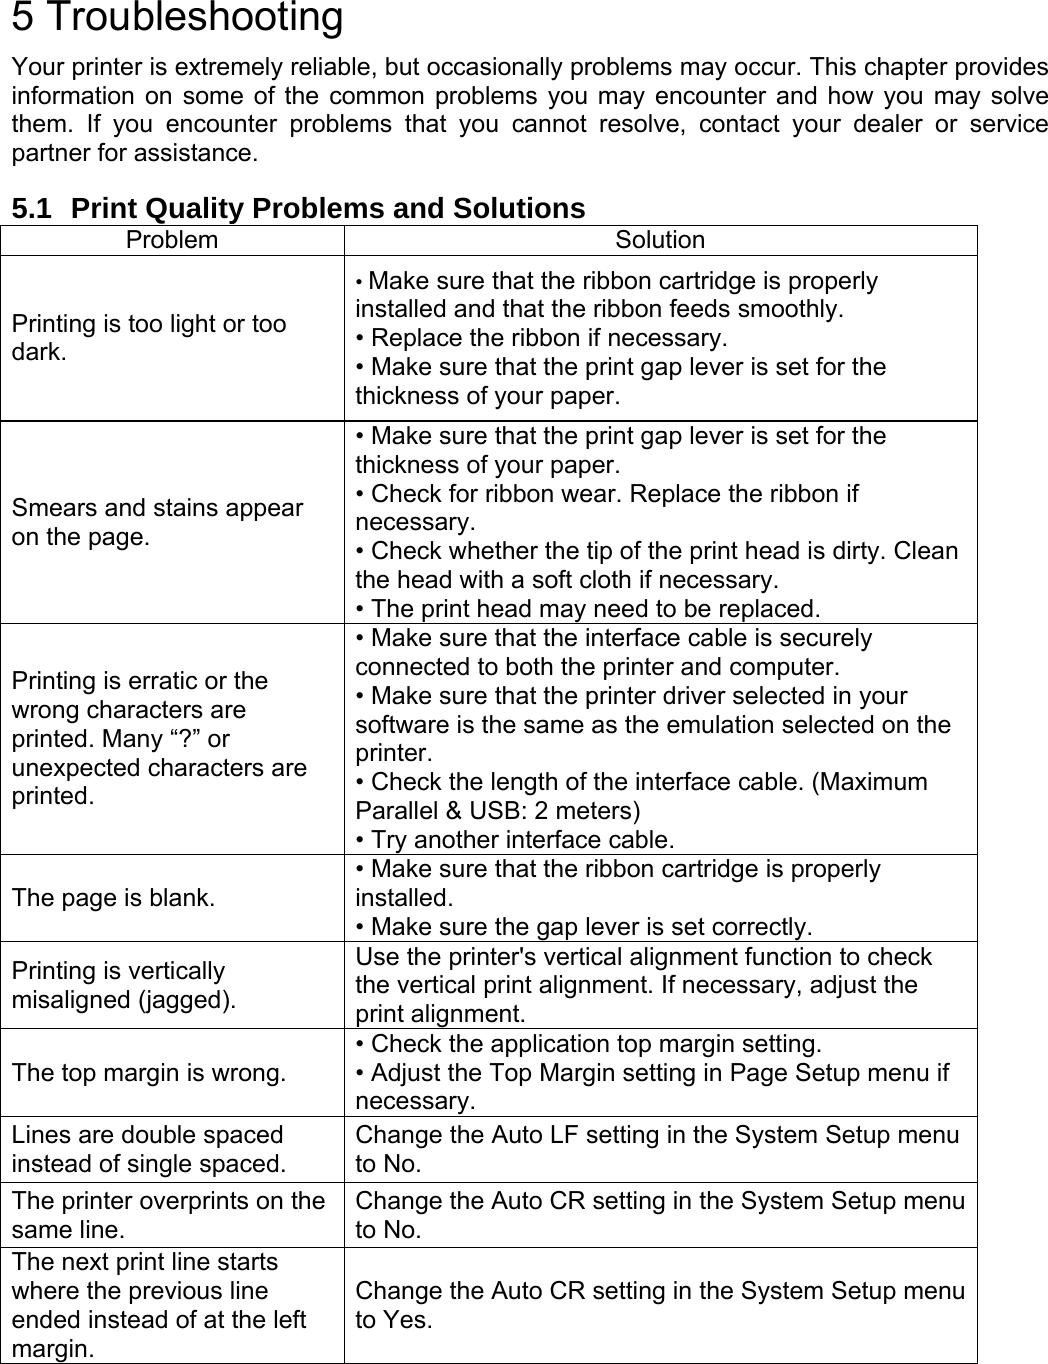    5 Troubleshooting Your printer is extremely reliable, but occasionally problems may occur. This chapter provides information on some of the common problems you may encounter and how you may solve them. If you encounter problems that you cannot resolve, contact your dealer or service partner for assistance.  5.1  Print Quality Problems and Solutions Problem Solution Printing is too light or too dark.   • Make sure that the ribbon cartridge is properly installed and that the ribbon feeds smoothly. • Replace the ribbon if necessary.     • Make sure that the print gap lever is set for the thickness of your paper.   Smears and stains appear on the page.   • Make sure that the print gap lever is set for the thickness of your paper.   • Check for ribbon wear. Replace the ribbon if necessary.  • Check whether the tip of the print head is dirty. Clean the head with a soft cloth if necessary.   • The print head may need to be replaced.   Printing is erratic or the wrong characters are printed. Many “?” or unexpected characters are printed.  • Make sure that the interface cable is securely connected to both the printer and computer.   • Make sure that the printer driver selected in your software is the same as the emulation selected on the printer. • Check the length of the interface cable. (Maximum Parallel &amp; USB: 2 meters) • Try another interface cable. The page is blank.   • Make sure that the ribbon cartridge is properly installed. • Make sure the gap lever is set correctly.   Printing is vertically misaligned (jagged).   Use the printer&apos;s vertical alignment function to check the vertical print alignment. If necessary, adjust the print alignment.   The top margin is wrong.   • Check the application top margin setting. • Adjust the Top Margin setting in Page Setup menu if necessary. Lines are double spaced instead of single spaced.   Change the Auto LF setting in the System Setup menu to No.   The printer overprints on the same line.   Change the Auto CR setting in the System Setup menu to No. The next print line starts where the previous line ended instead of at the left margin.  Change the Auto CR setting in the System Setup menu to Yes.  